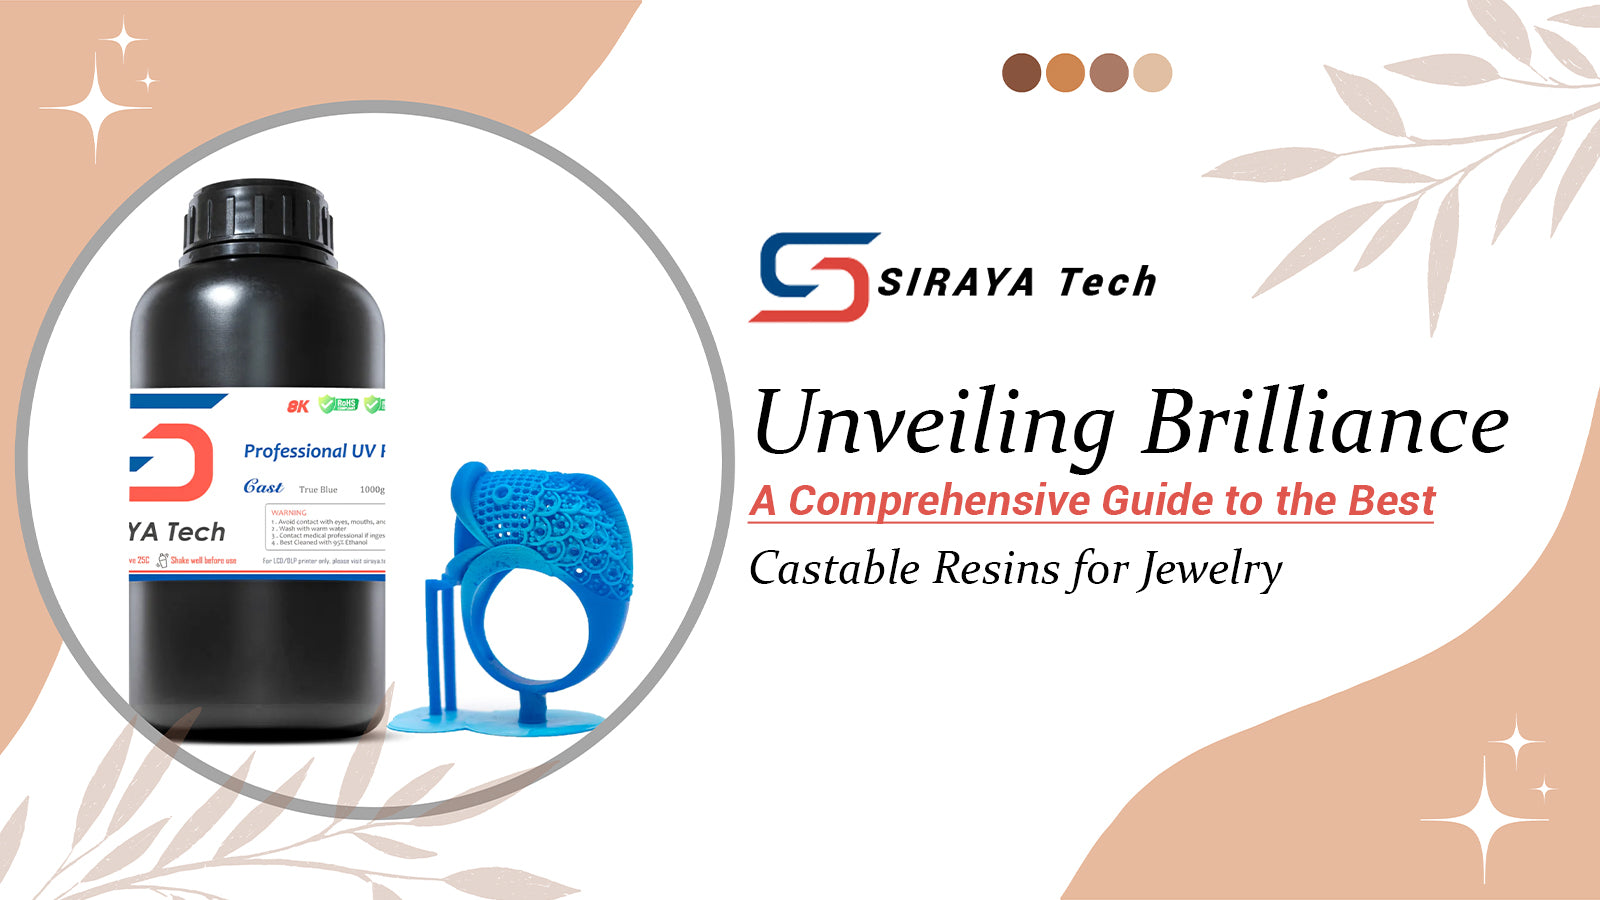 Unveiling Brilliance: A Comprehensive Guide to the Best Castable Resins for Jewelry